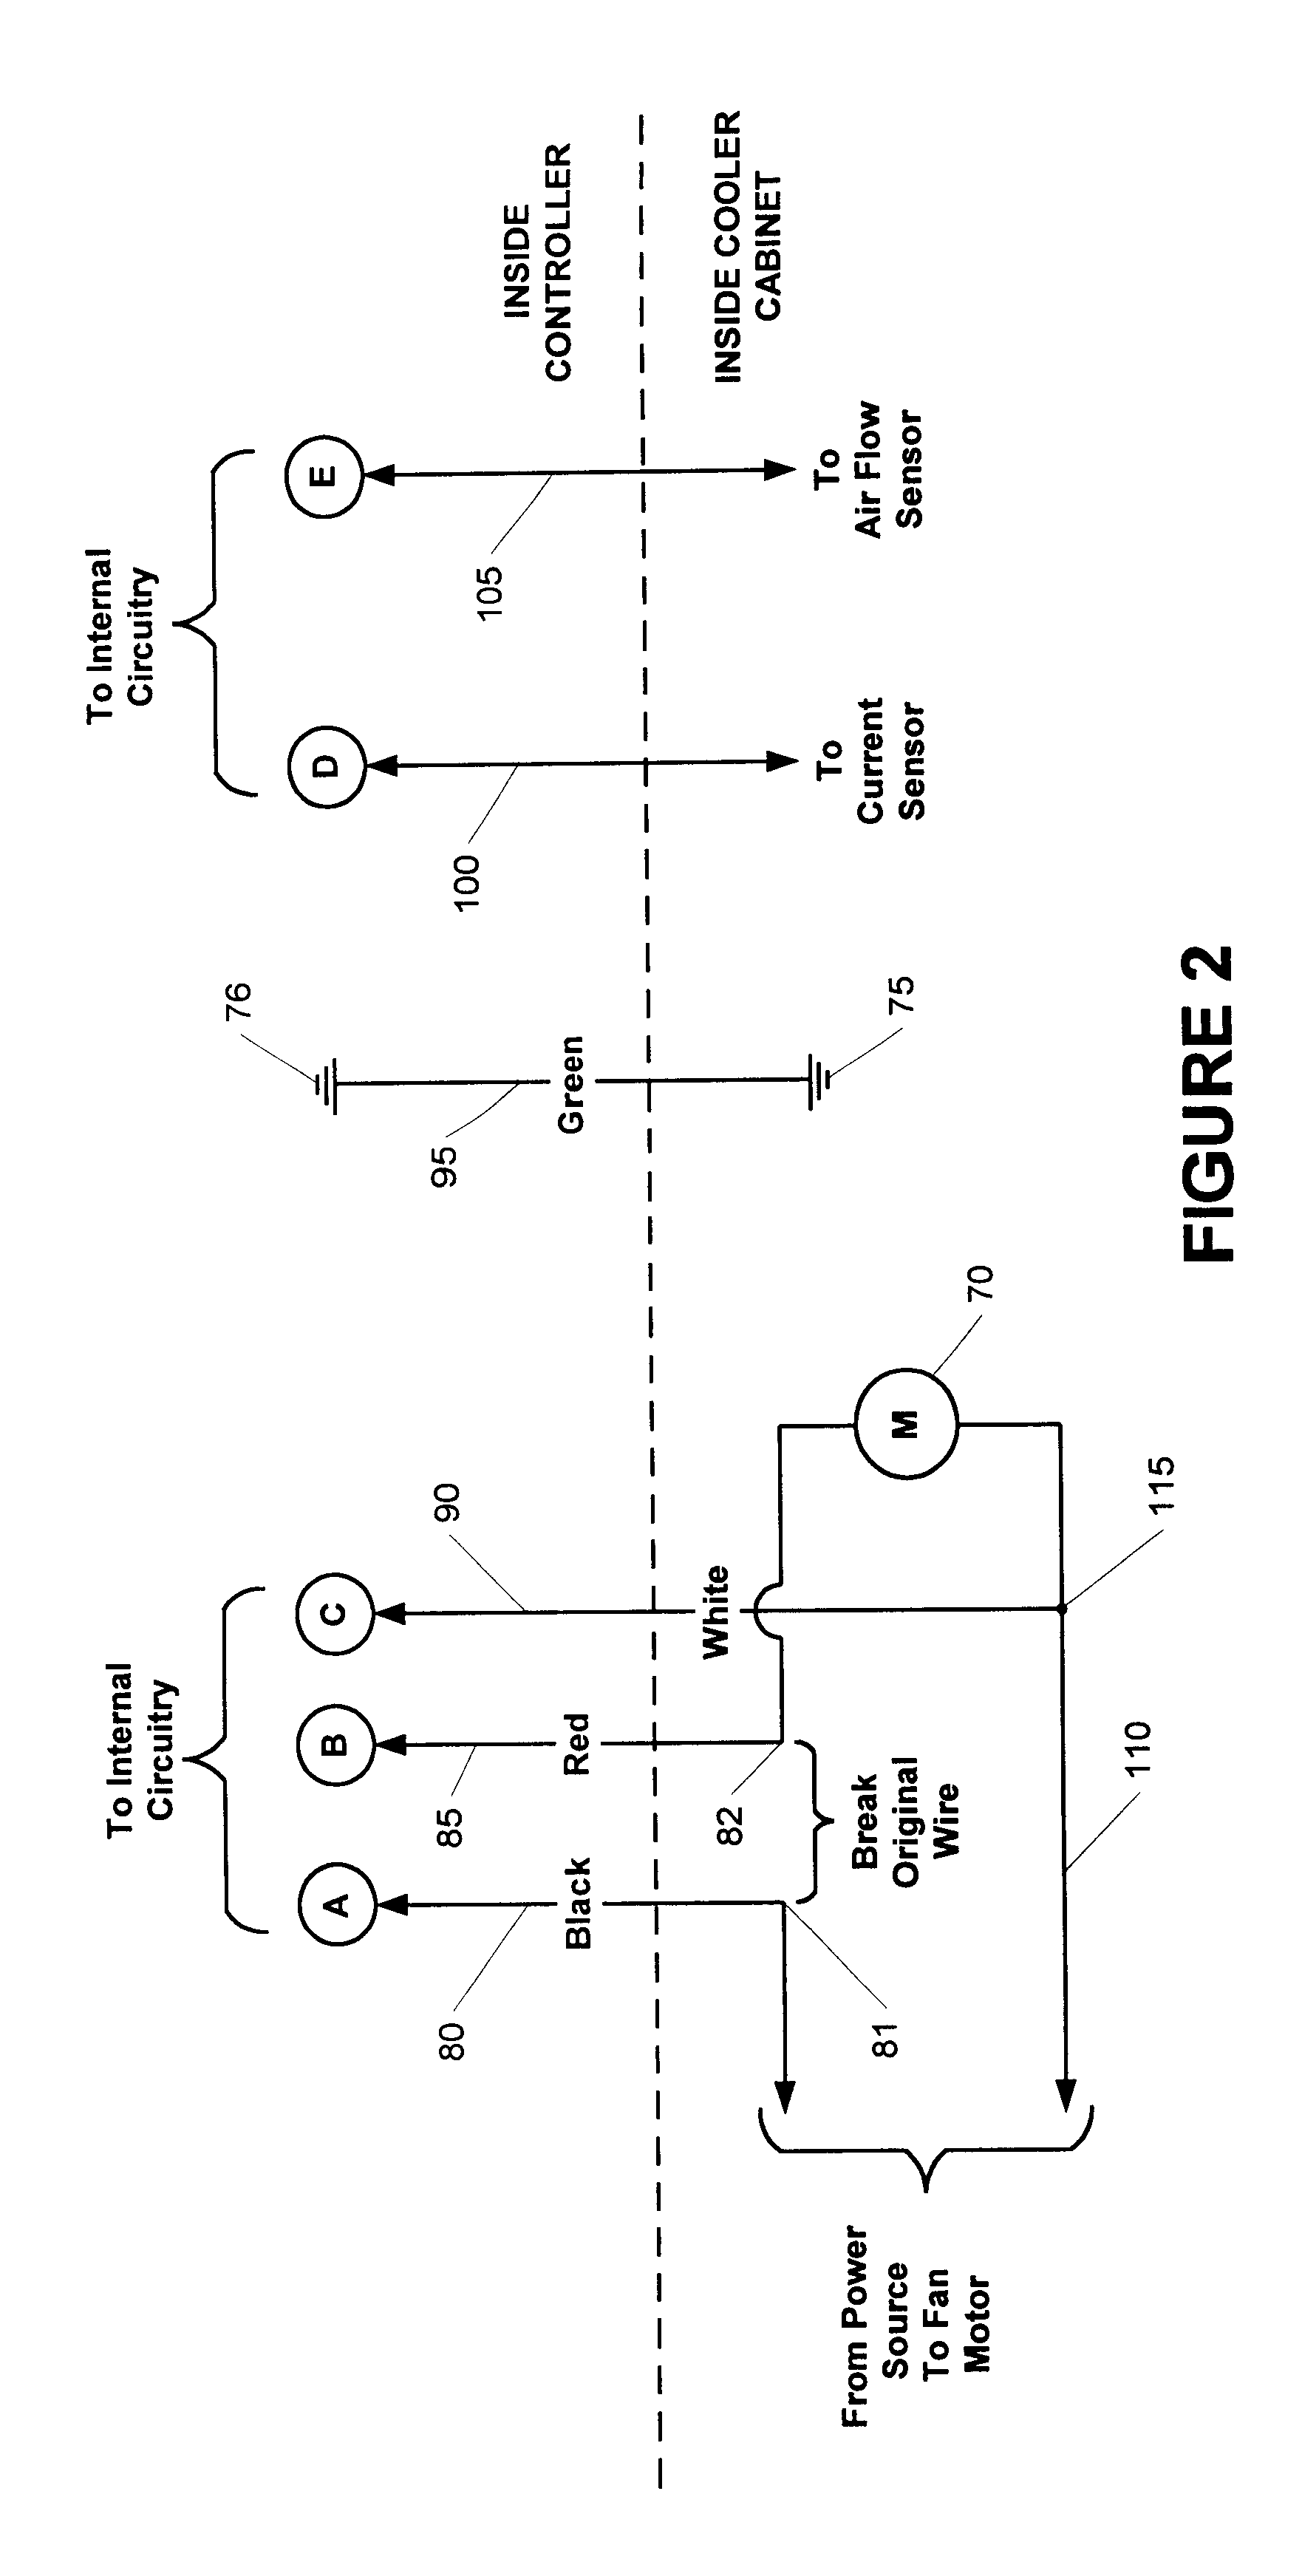 Energy saving device for walk-in refrigerators and freezers